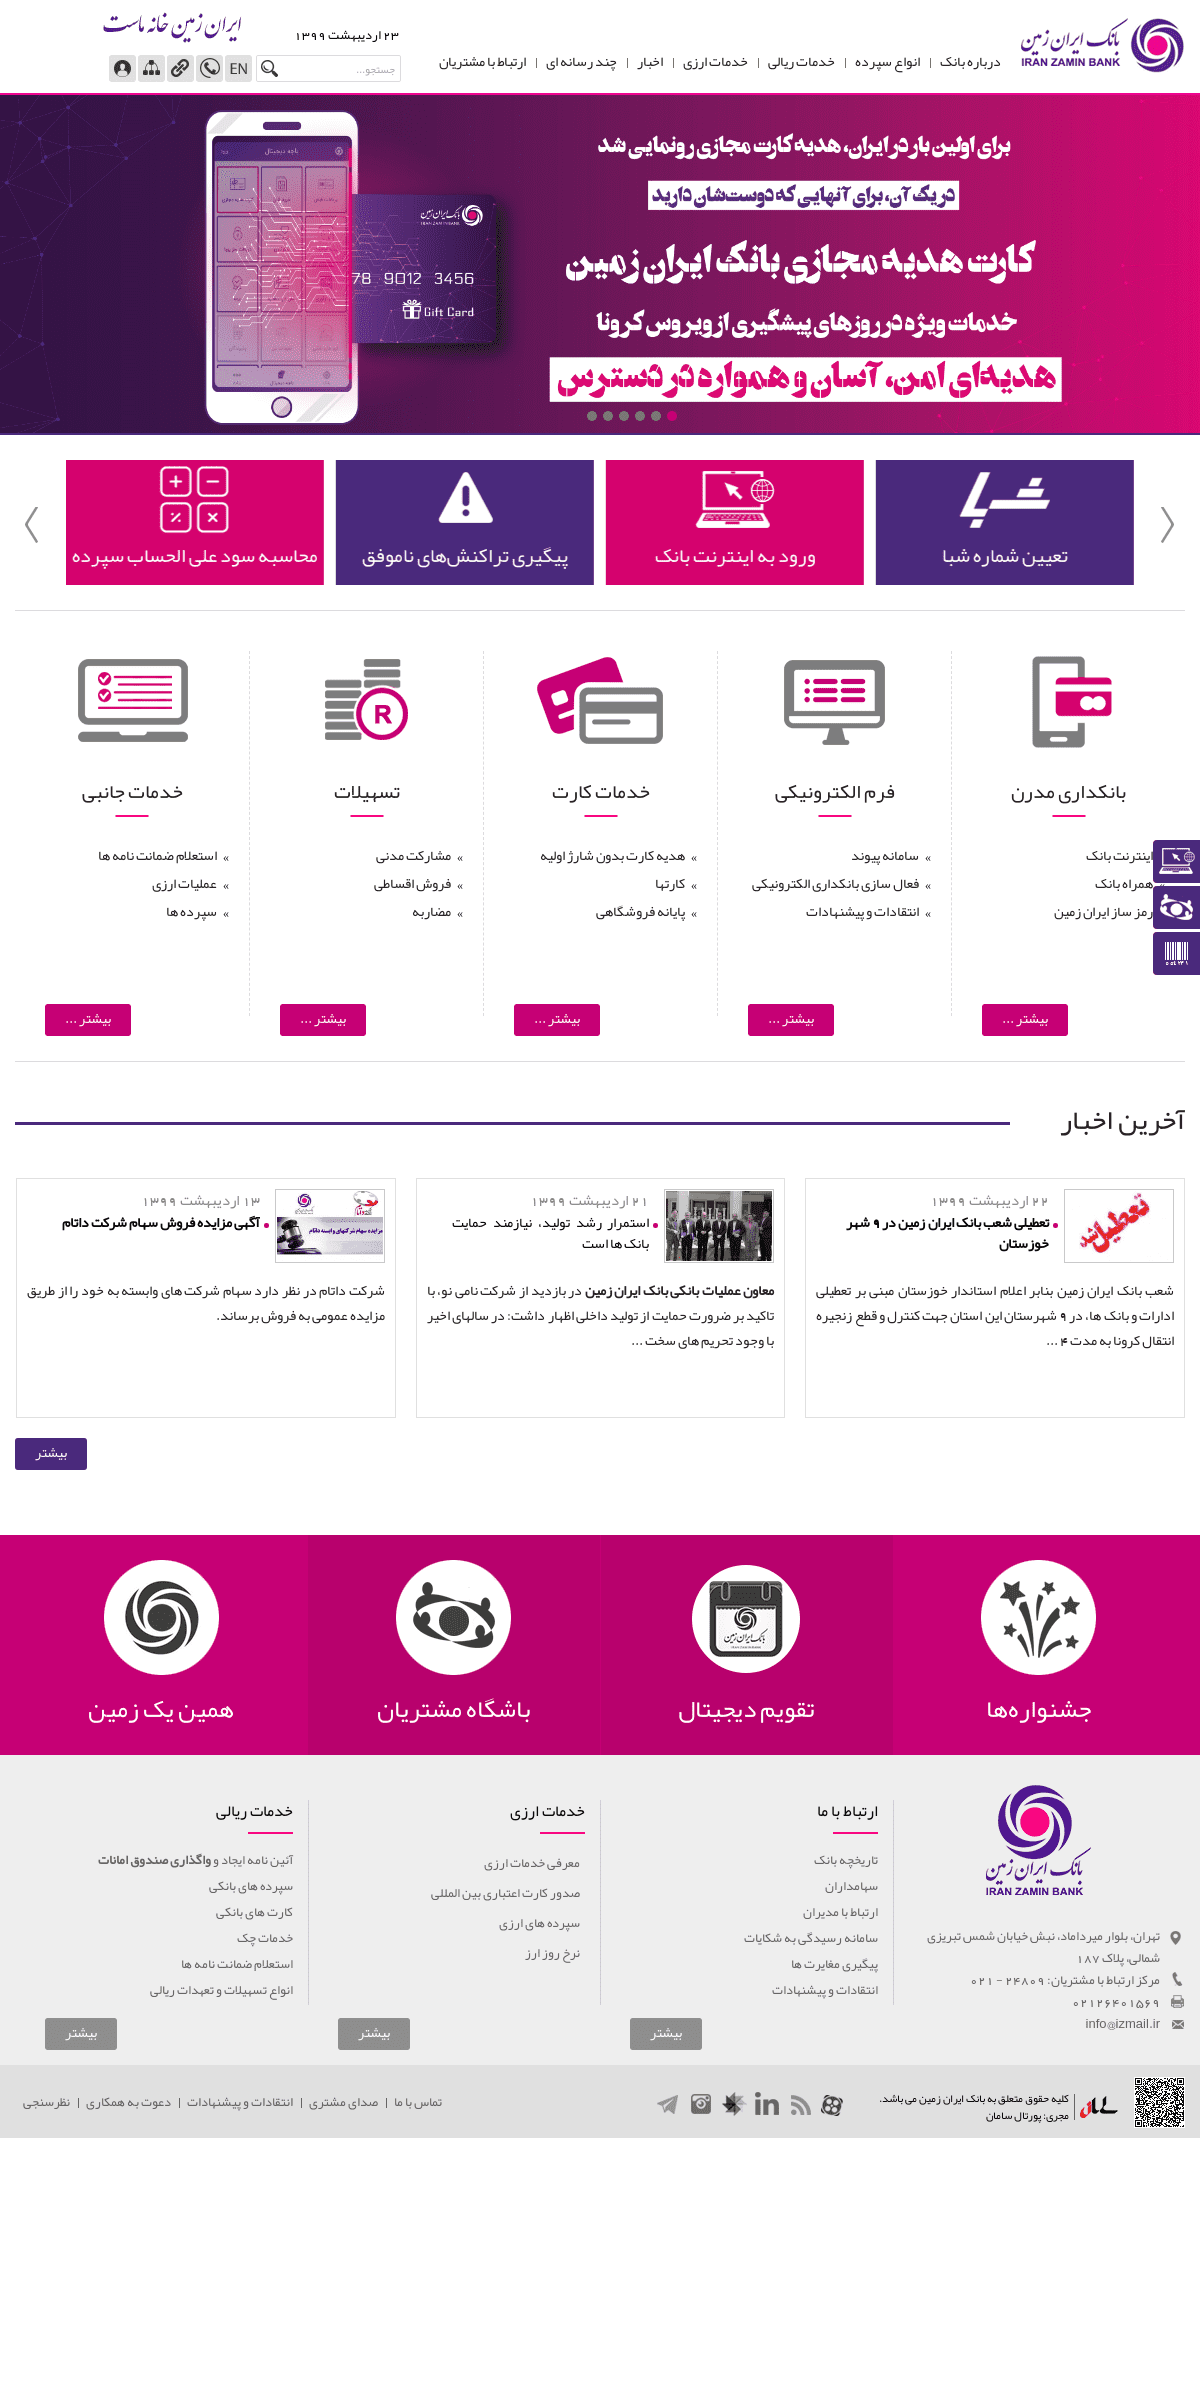 A complete backup of izbank.ir